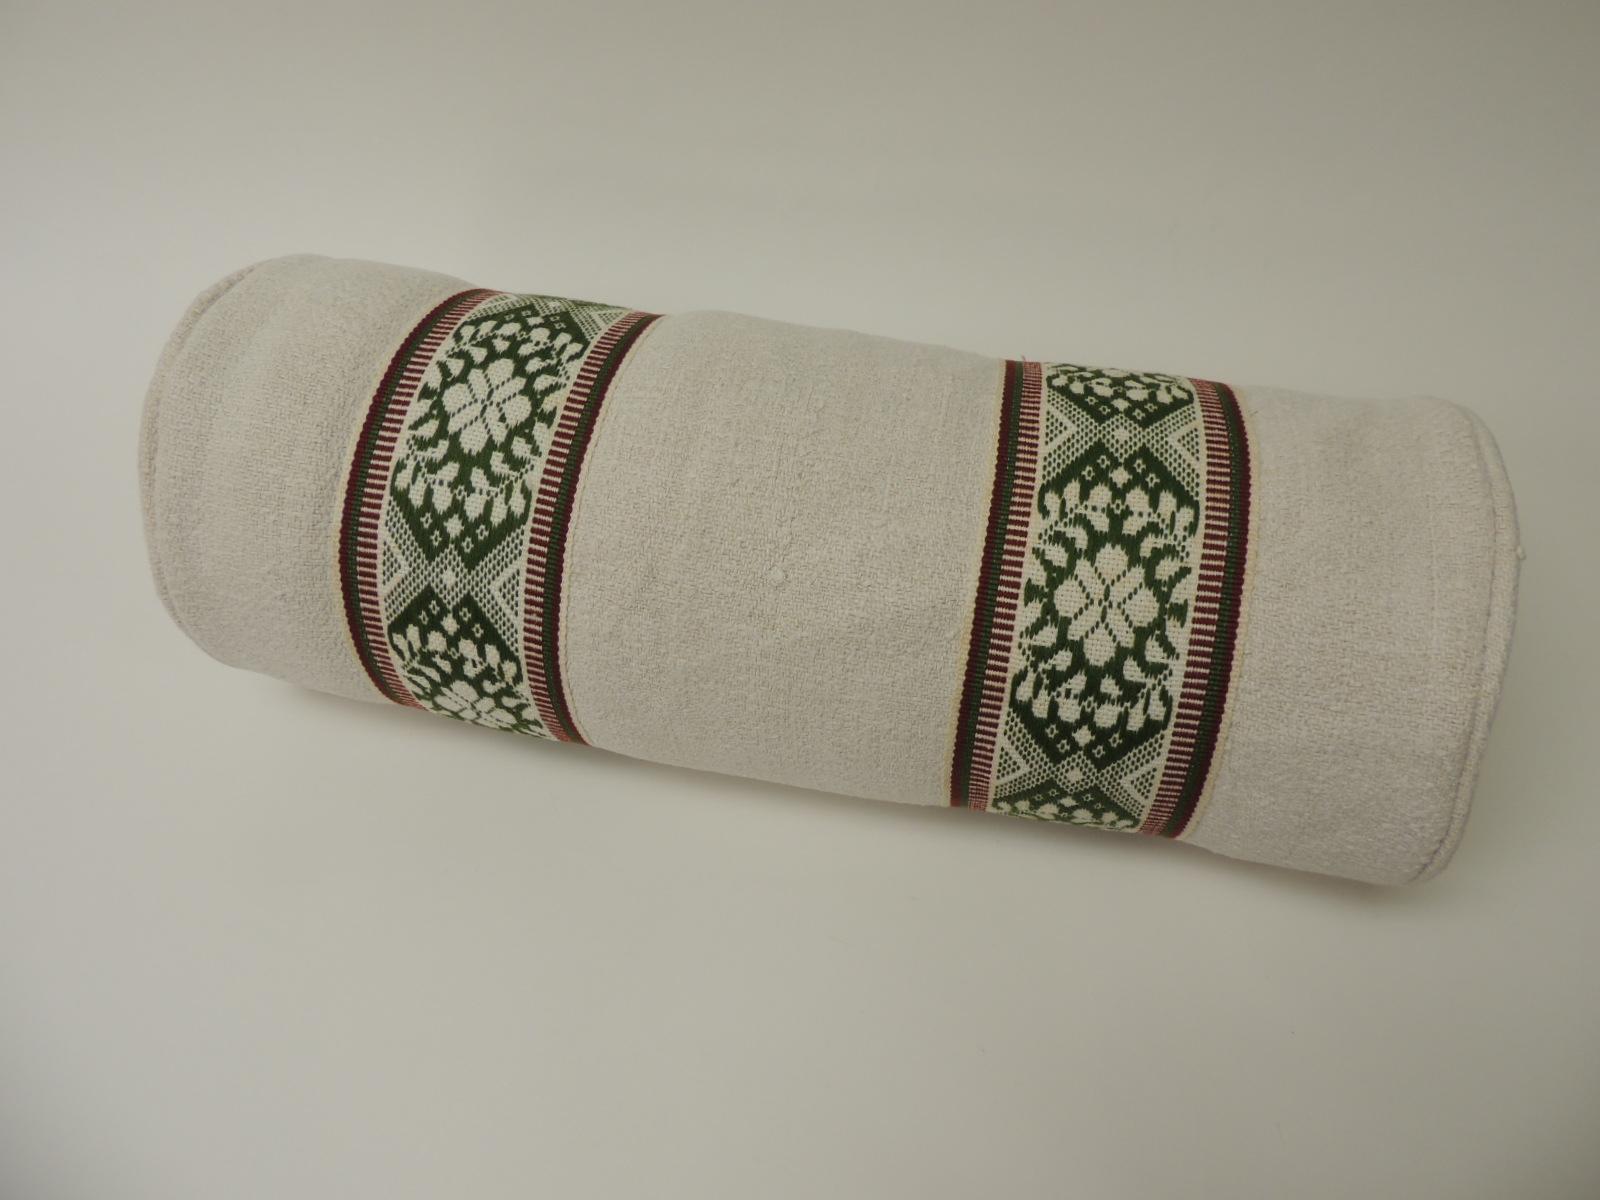 Slovenian Vintage Green and Natural Woven Trim Decorative Round Roll Bolster Pillow